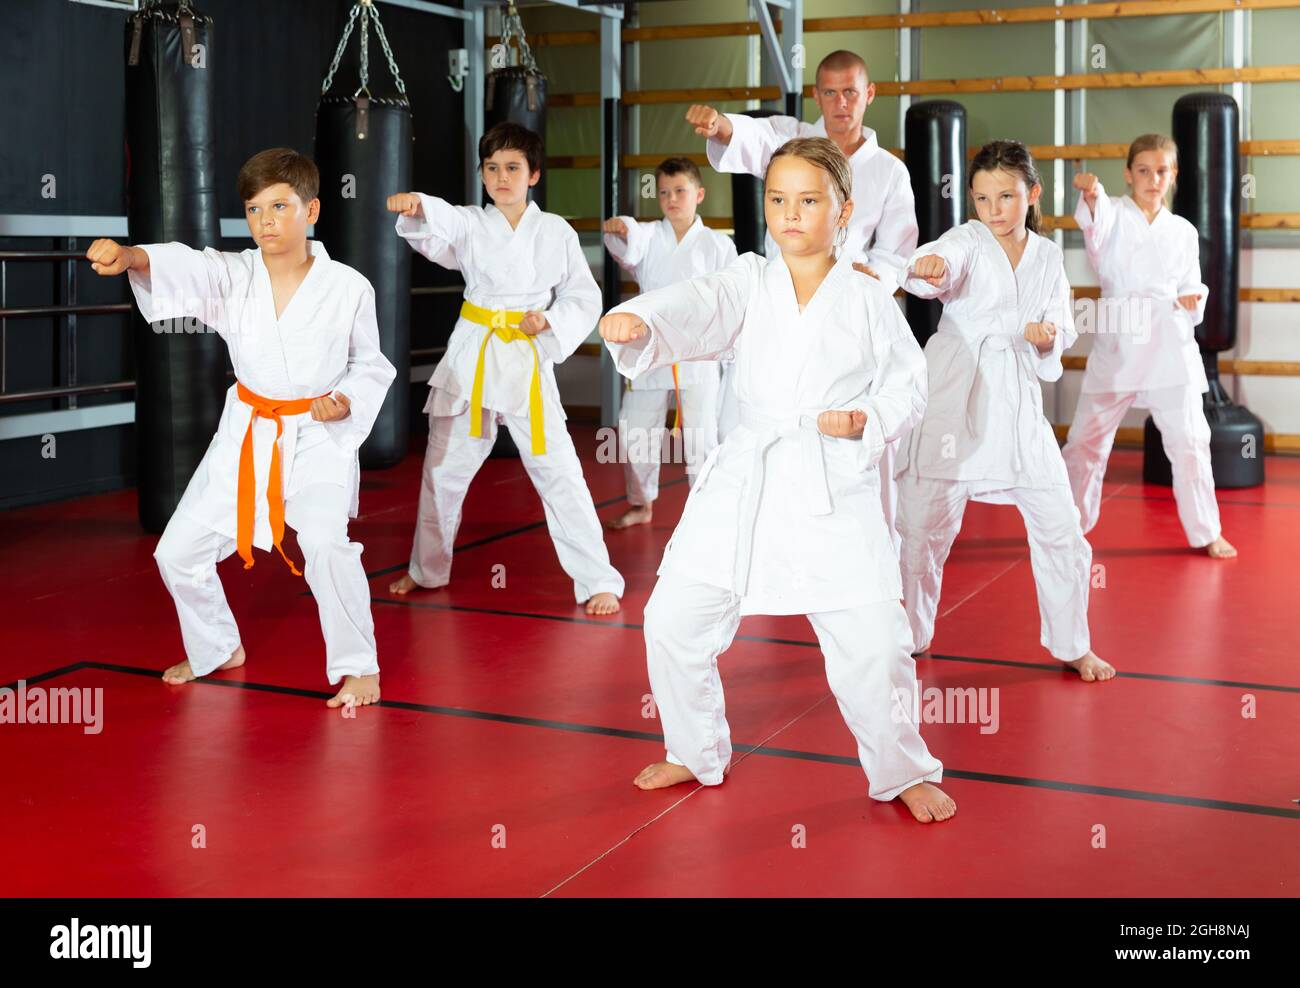 Karate kids in kimono performing kata moves with their teacher in gym  during group training Stock Photo - Alamy